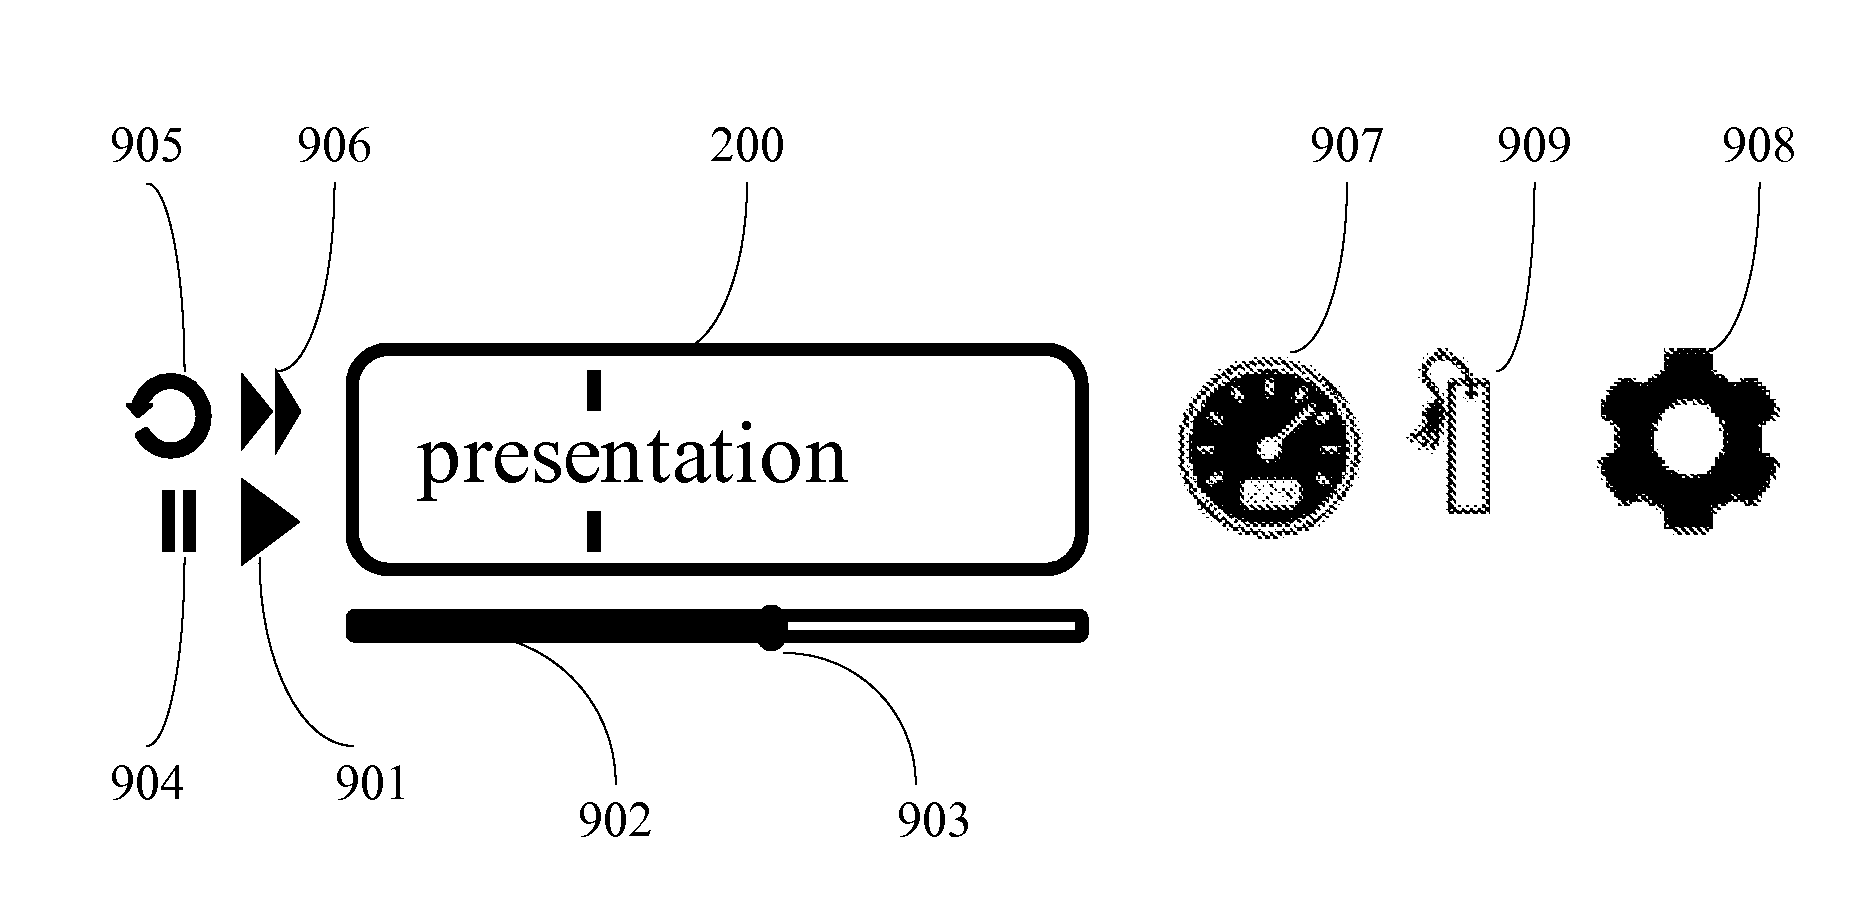 Serial text display for optimal recognition apparatus and method